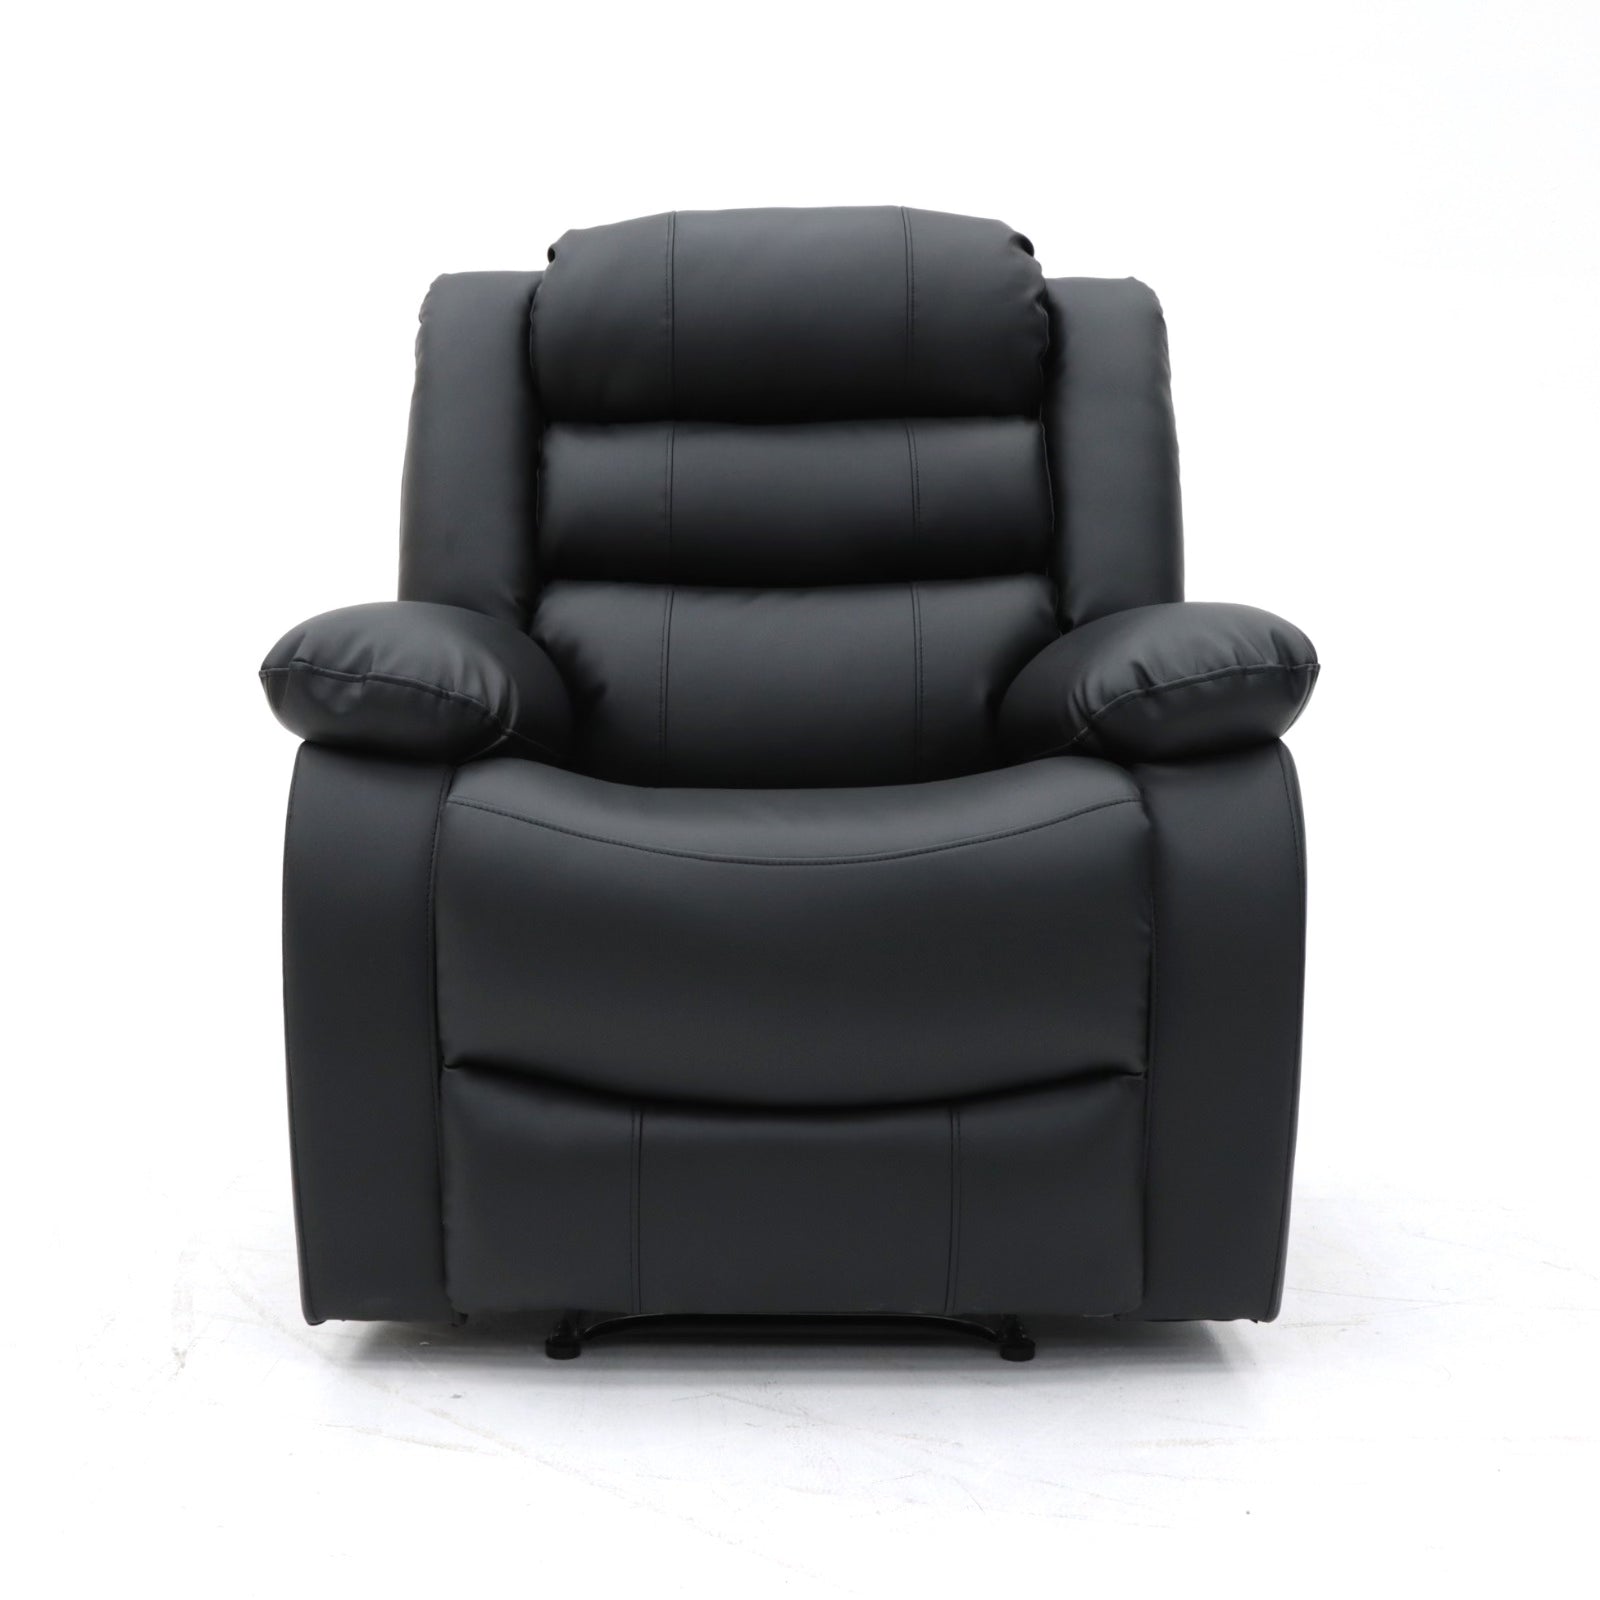 Augusta Manual Recliner Chair Black Leather